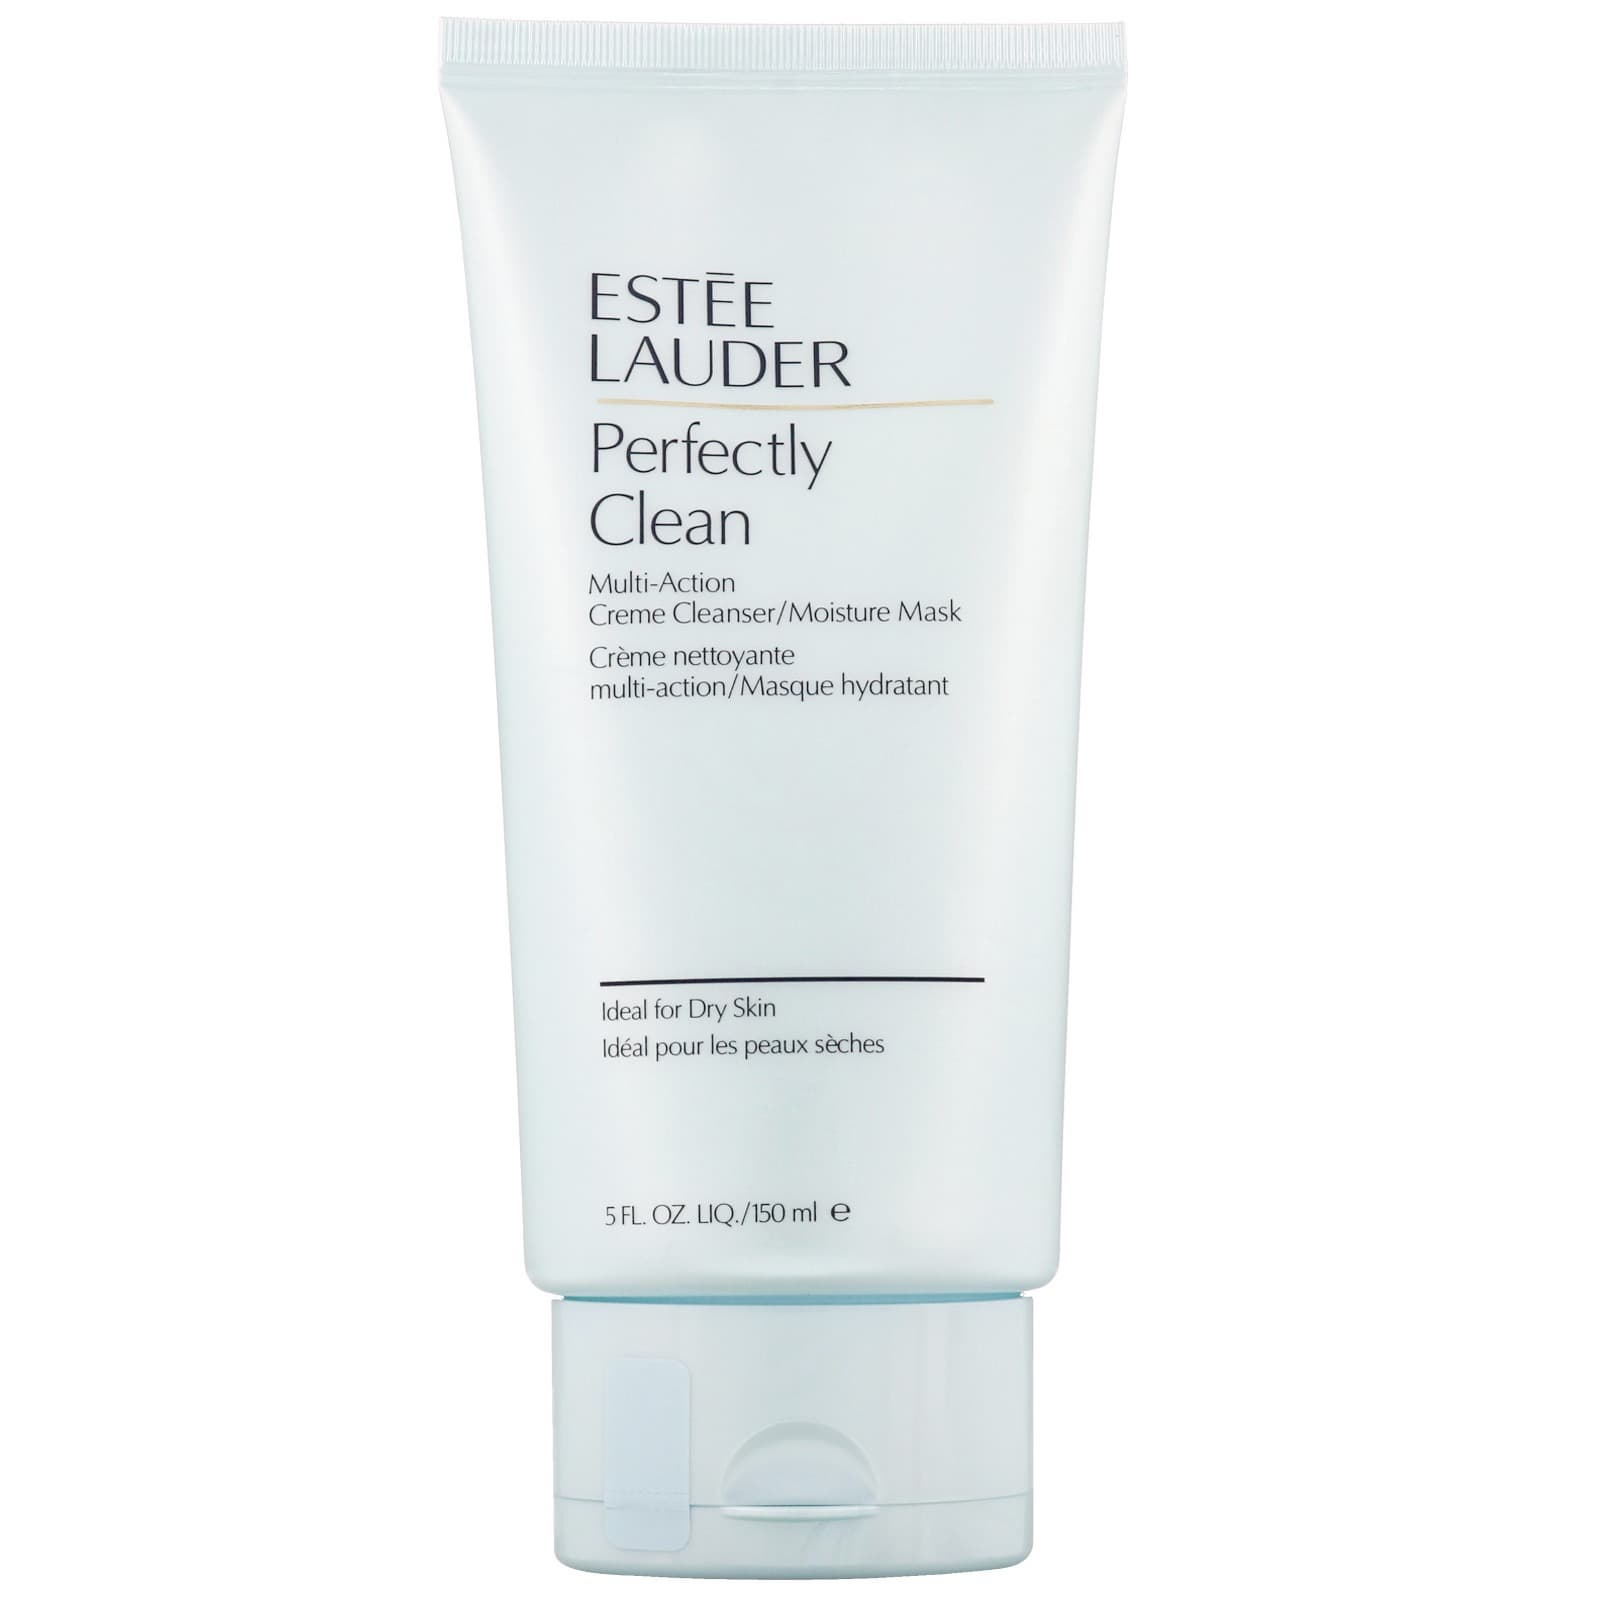 EsteeLauder Perfectly Clean MultiAction Foam Cleanser and Purifying Mask 150ml Facial Cleanser